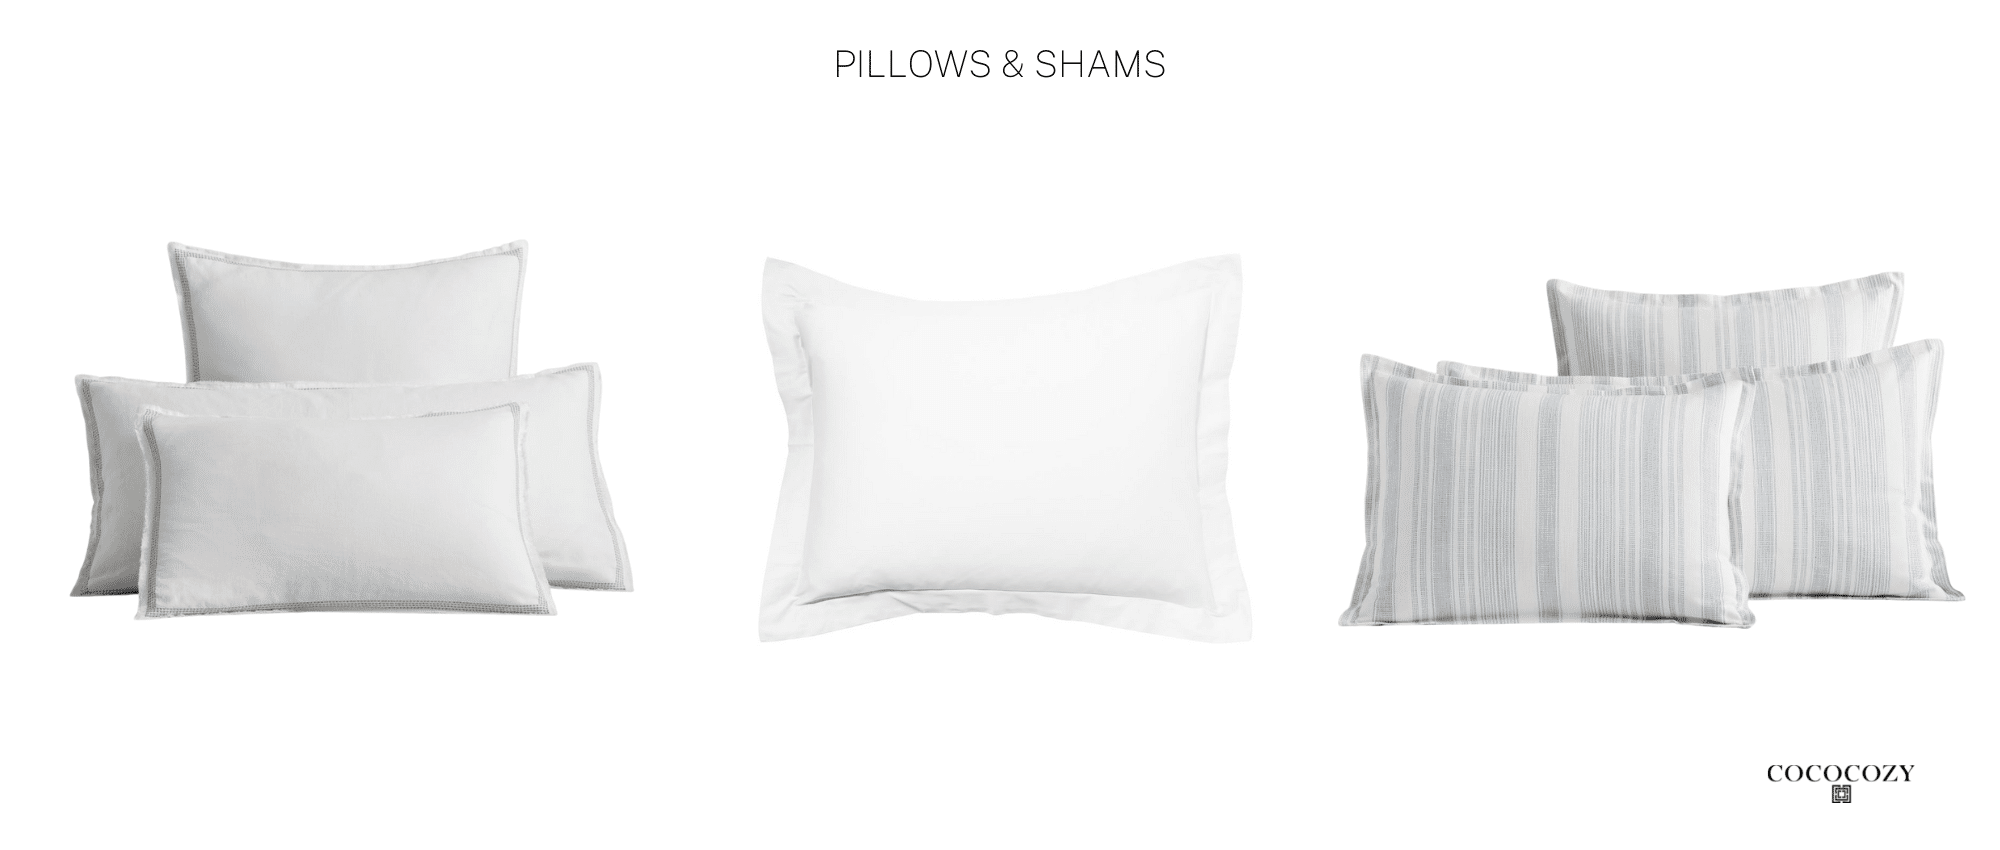 Alt tag for pillow-shams-cococozy